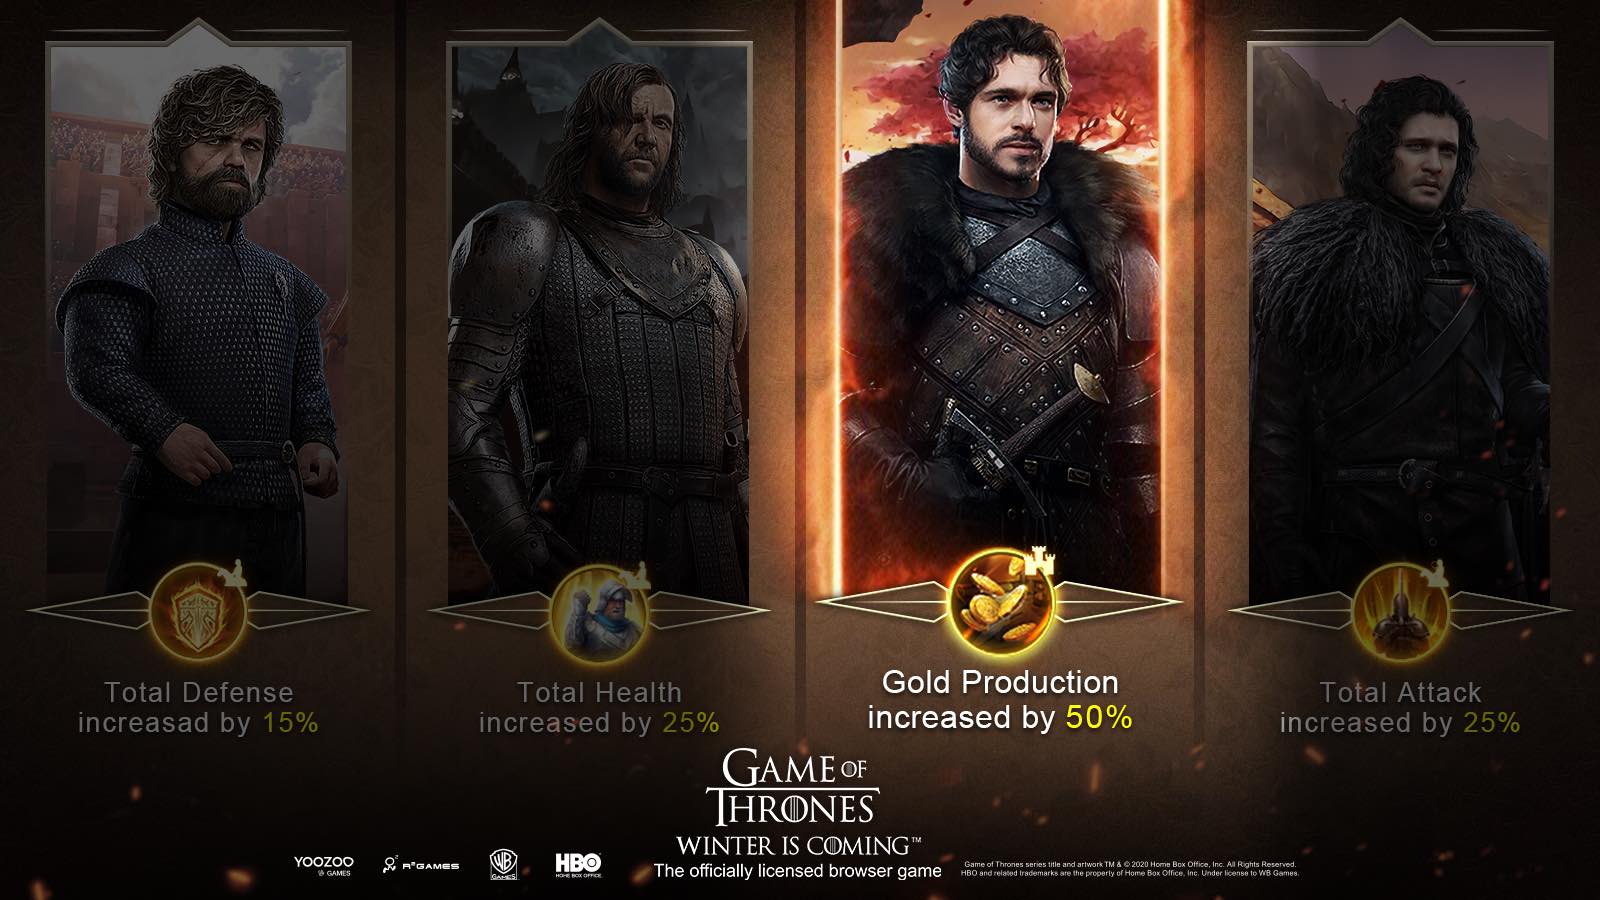 The Latest Game of Thrones Winter is Coming Patch on R2 Games Adds Awakening and a New Daily Event